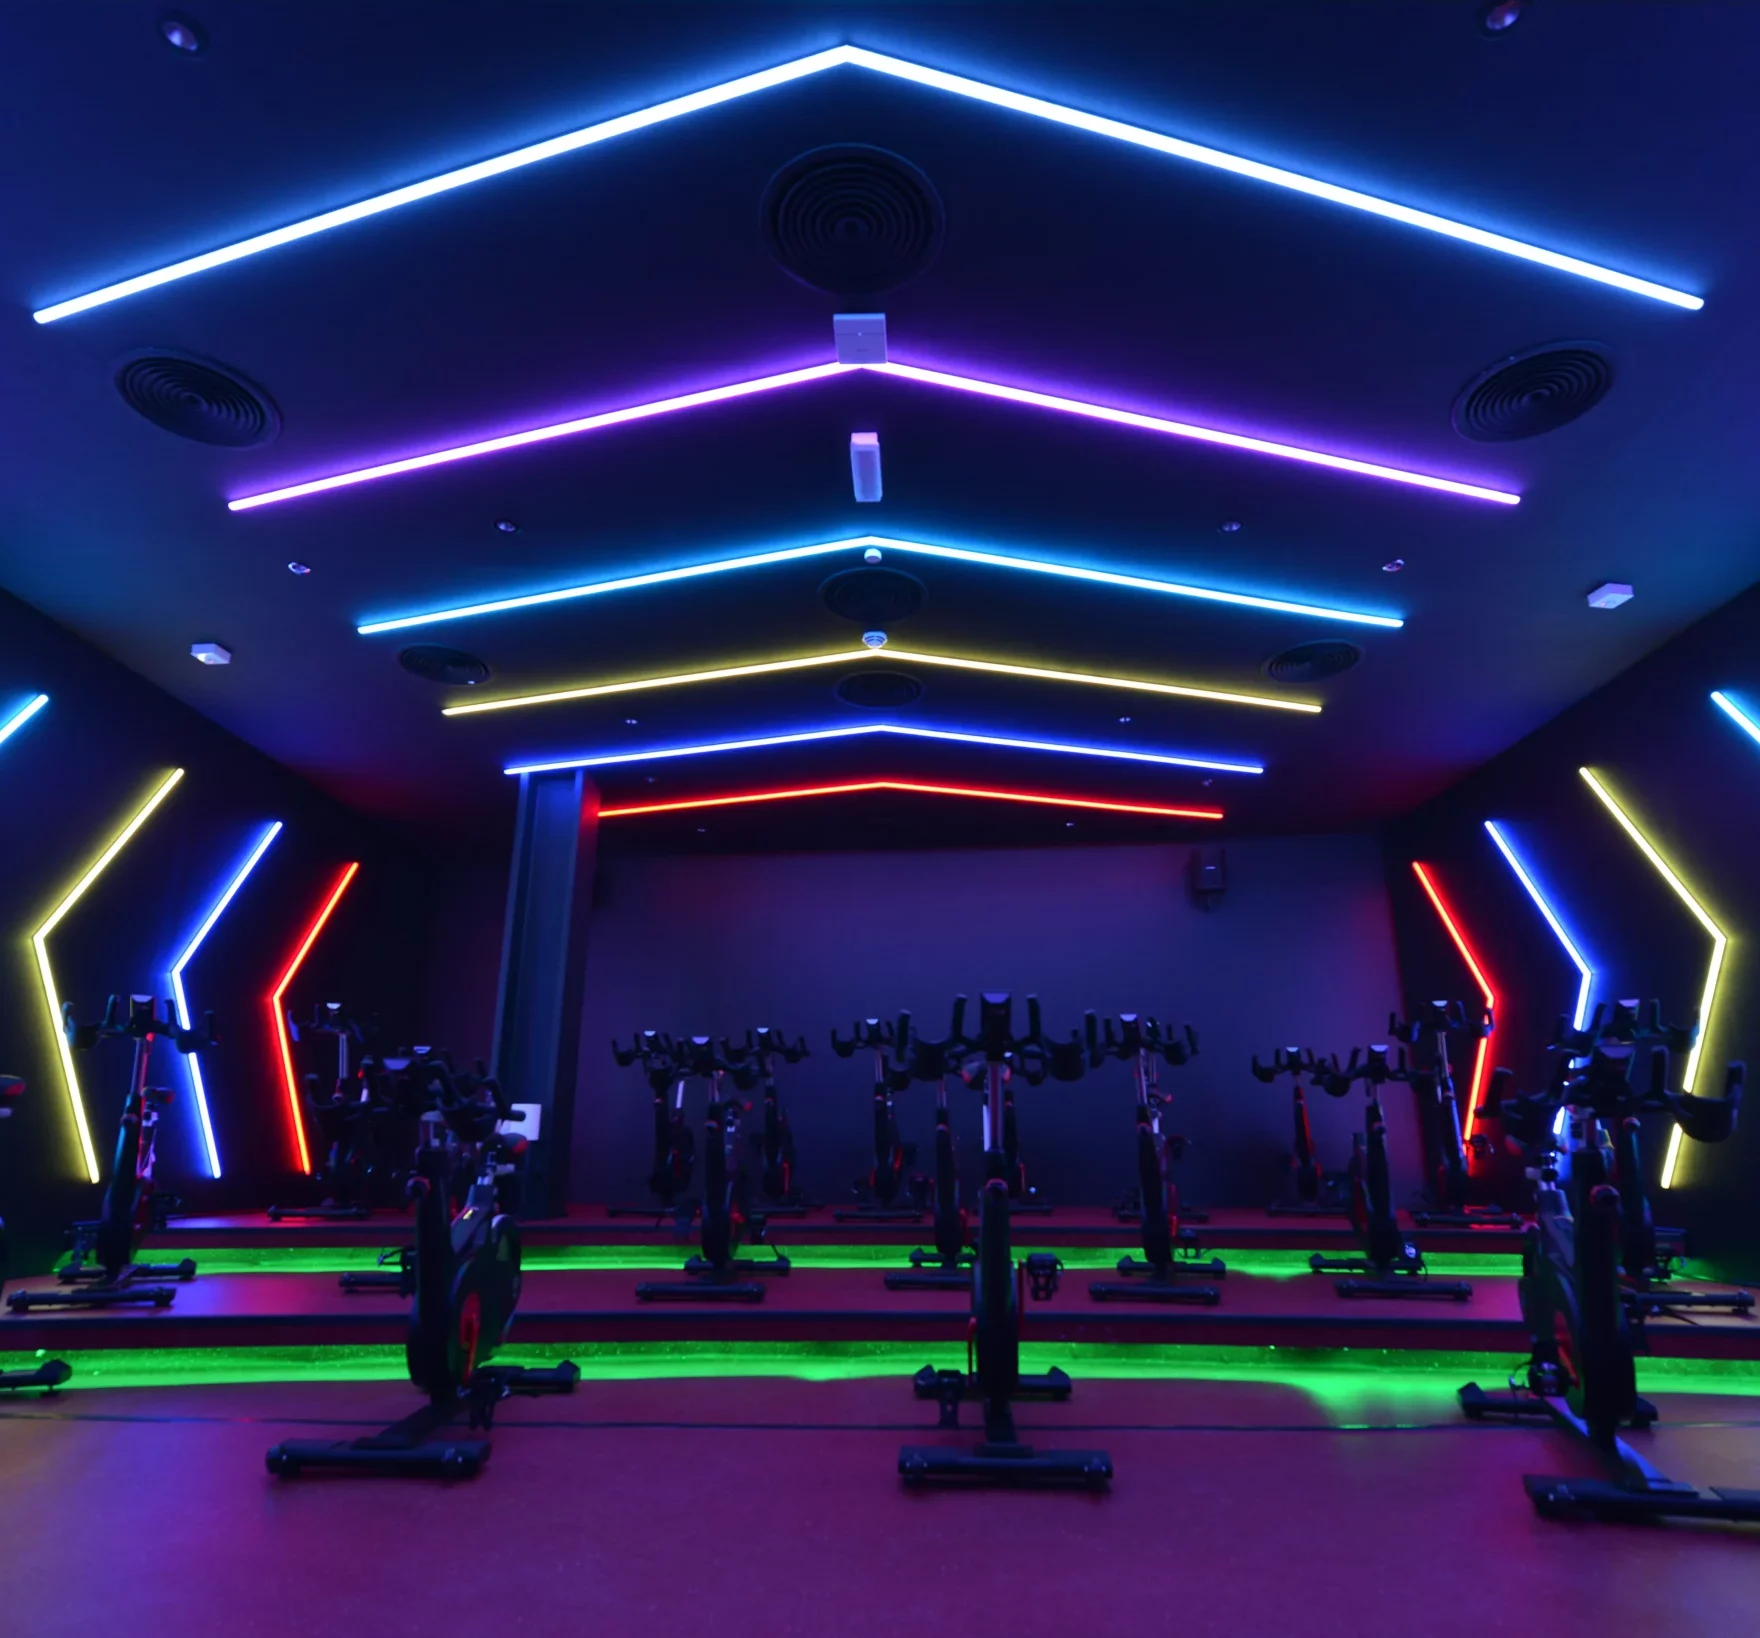 FITNESS FIRST - gym lighting project - lighting design solutions - ambience lighting